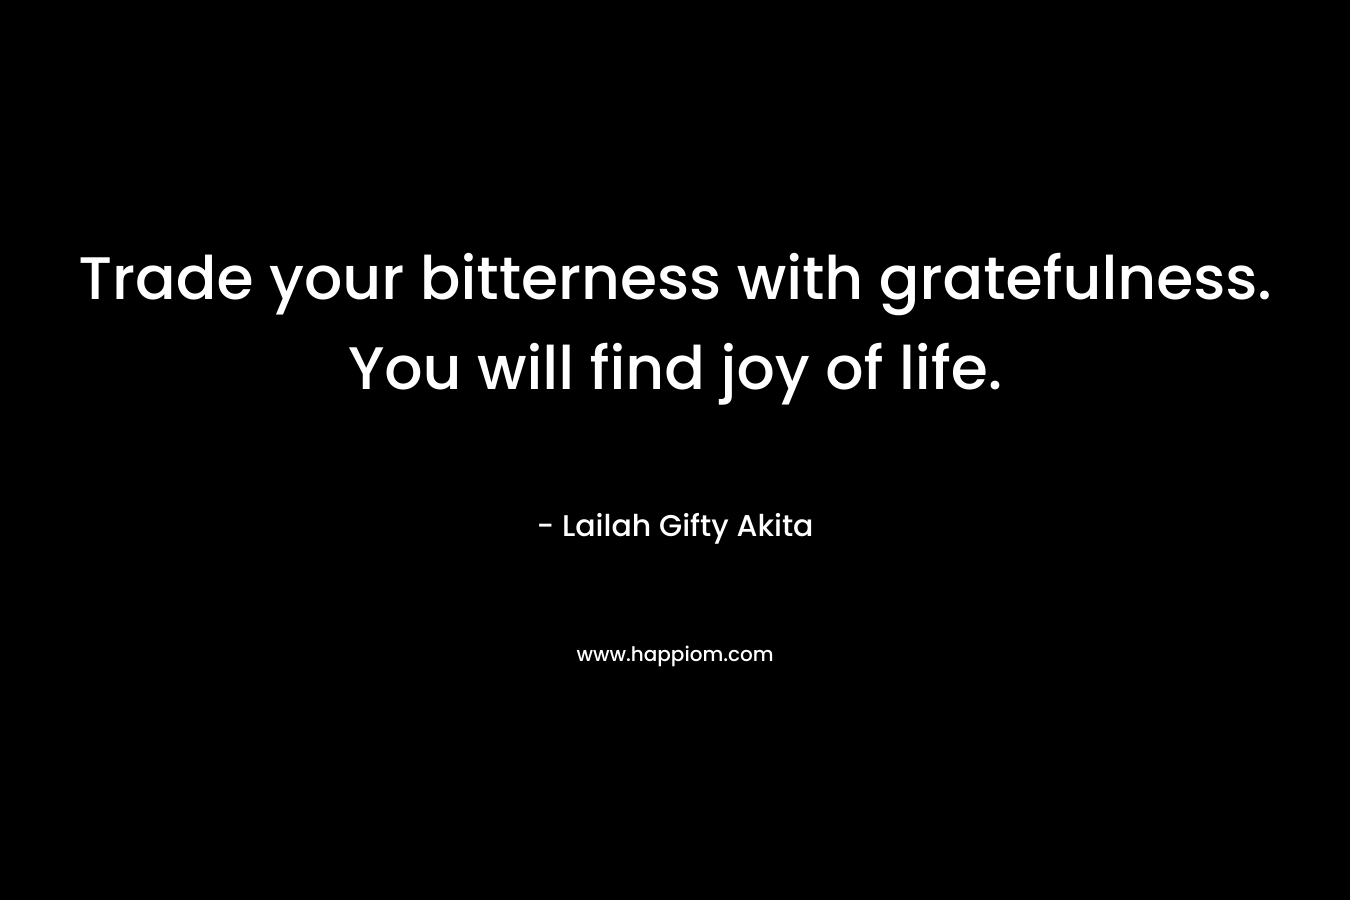 Trade your bitterness with gratefulness. You will find joy of life.